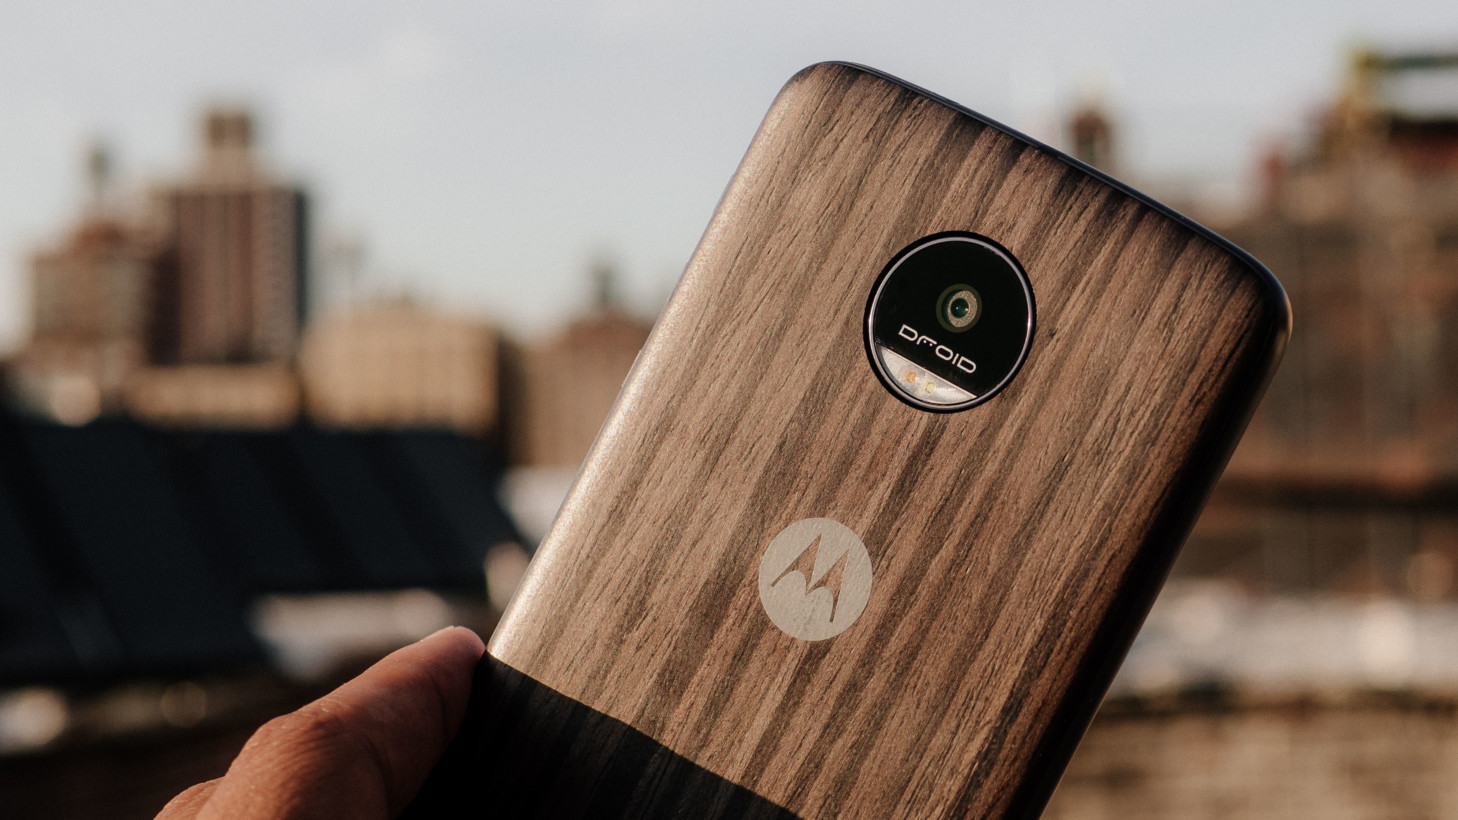 The Moto Z is packaged with a Style Mod, at least on Verizon, so you don't have to see the 'real'back unless you want to. Notice the camera is now flush with the body.